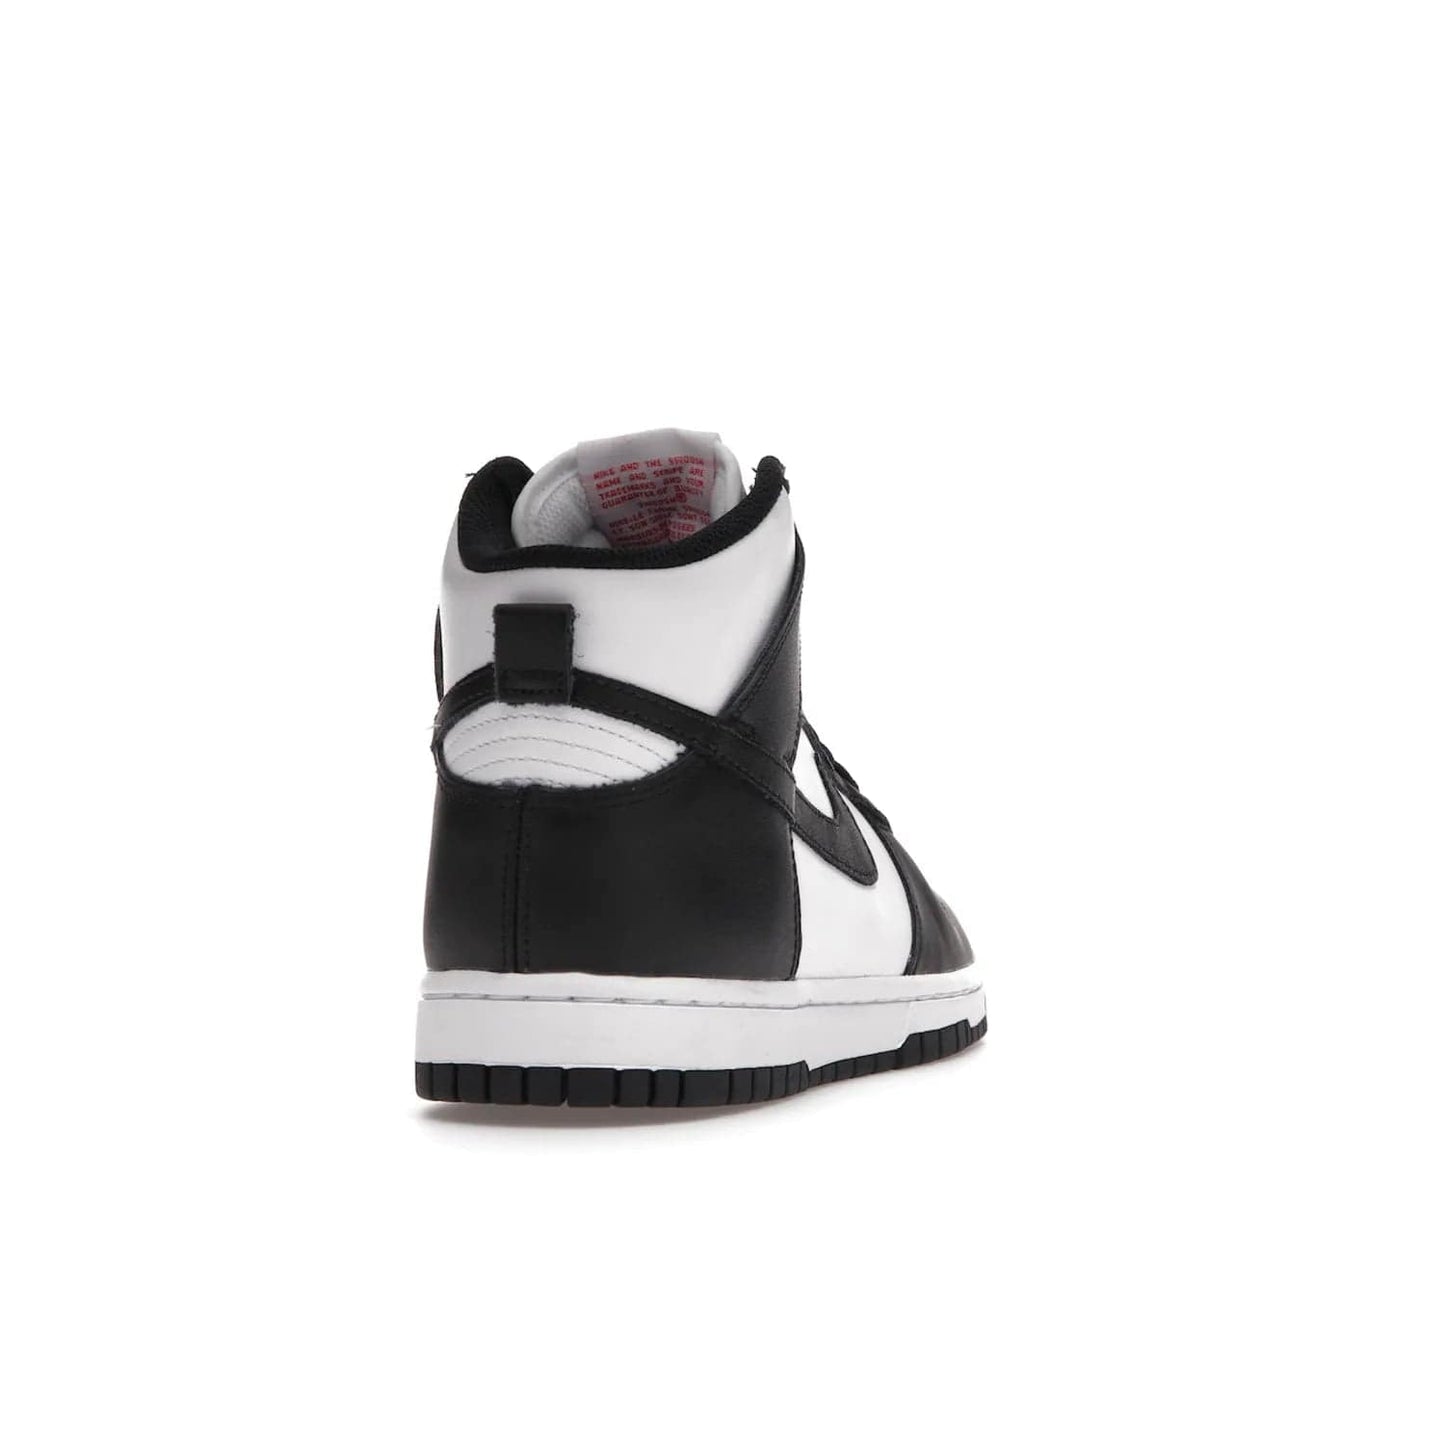 Nike Dunk High Panda (2021) (Women's) - Image 30 - Only at www.BallersClubKickz.com - The Nike Dunk High Panda (2021) (Women's) shoe offers stylish comfort. Featuring black and white leather uppers, a matching sole, with a red woven tongue label, this luxurious shoe will make any outfit stand out. Dare to be different and add to your wardrobe today!